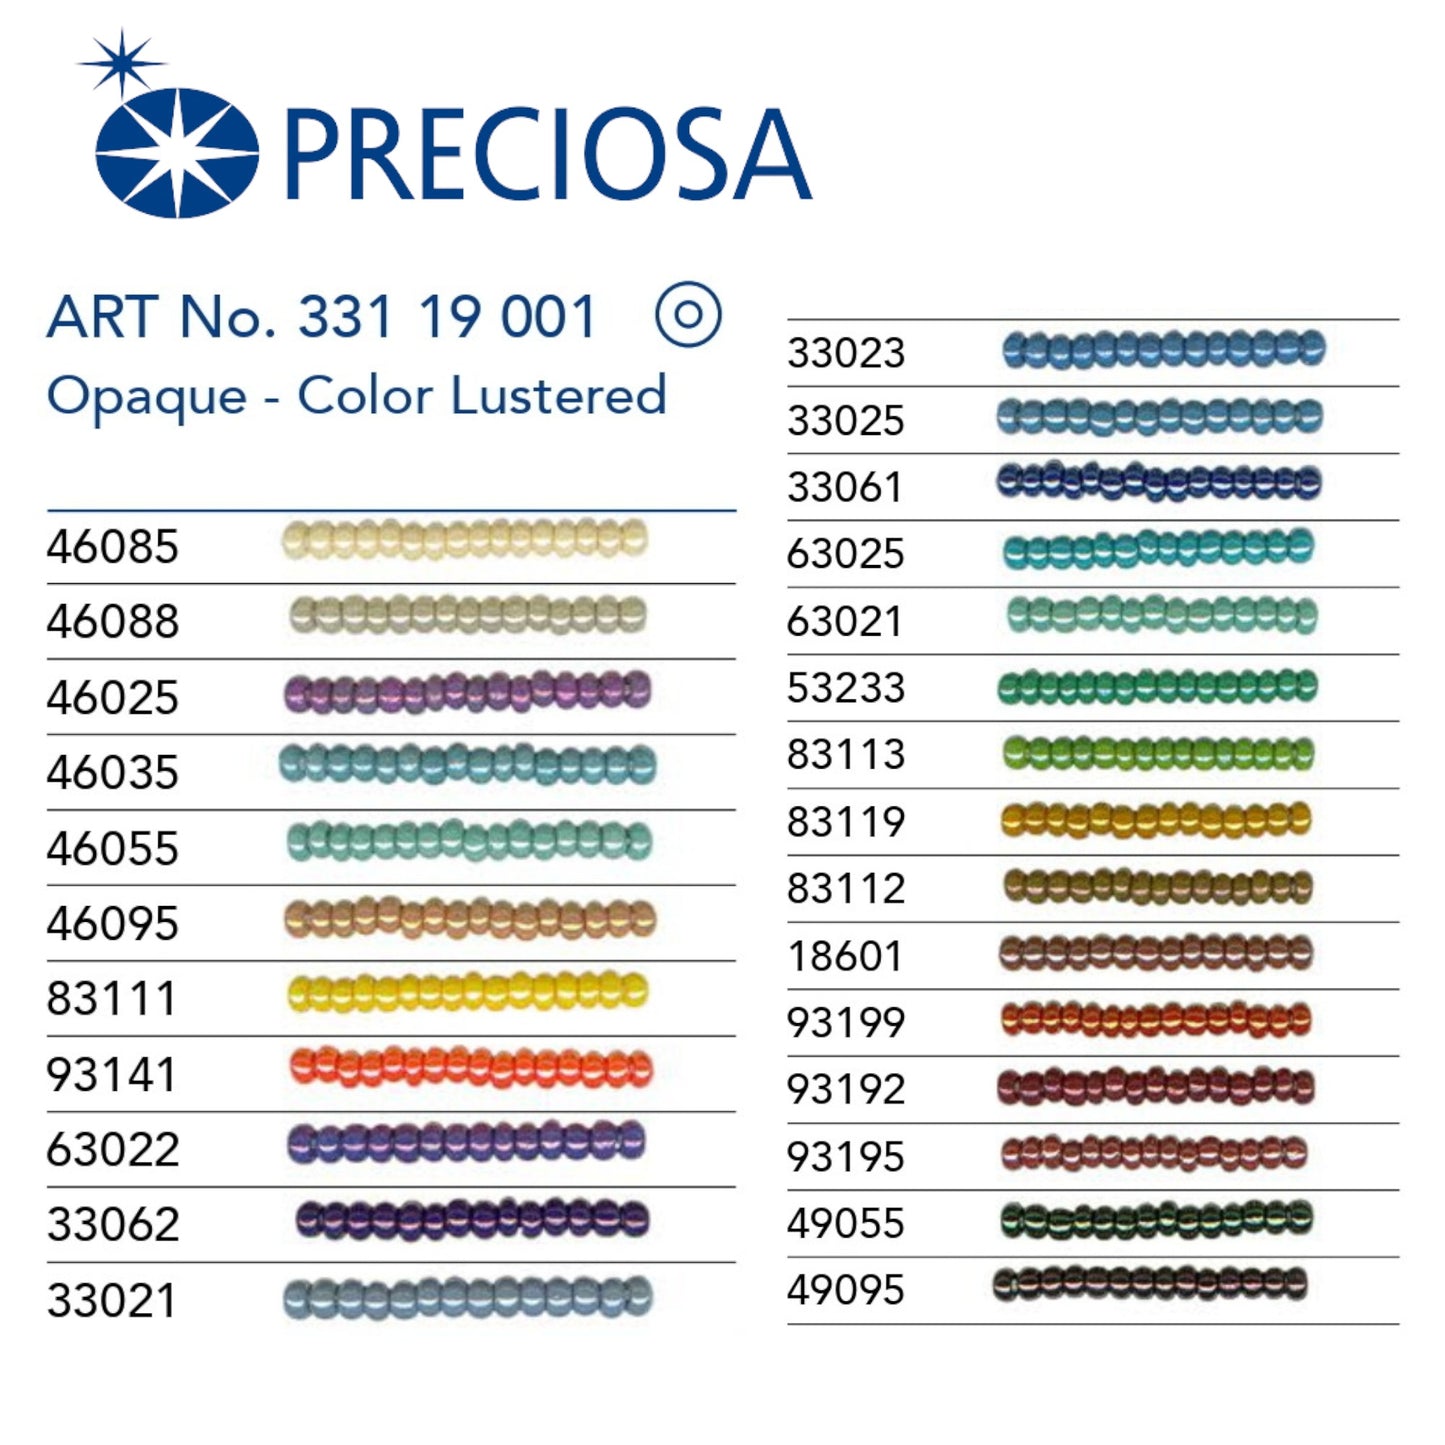 63021 Czech Seed Beads Preciosa Rocailes Opaque - Color Lustered - VadymShop